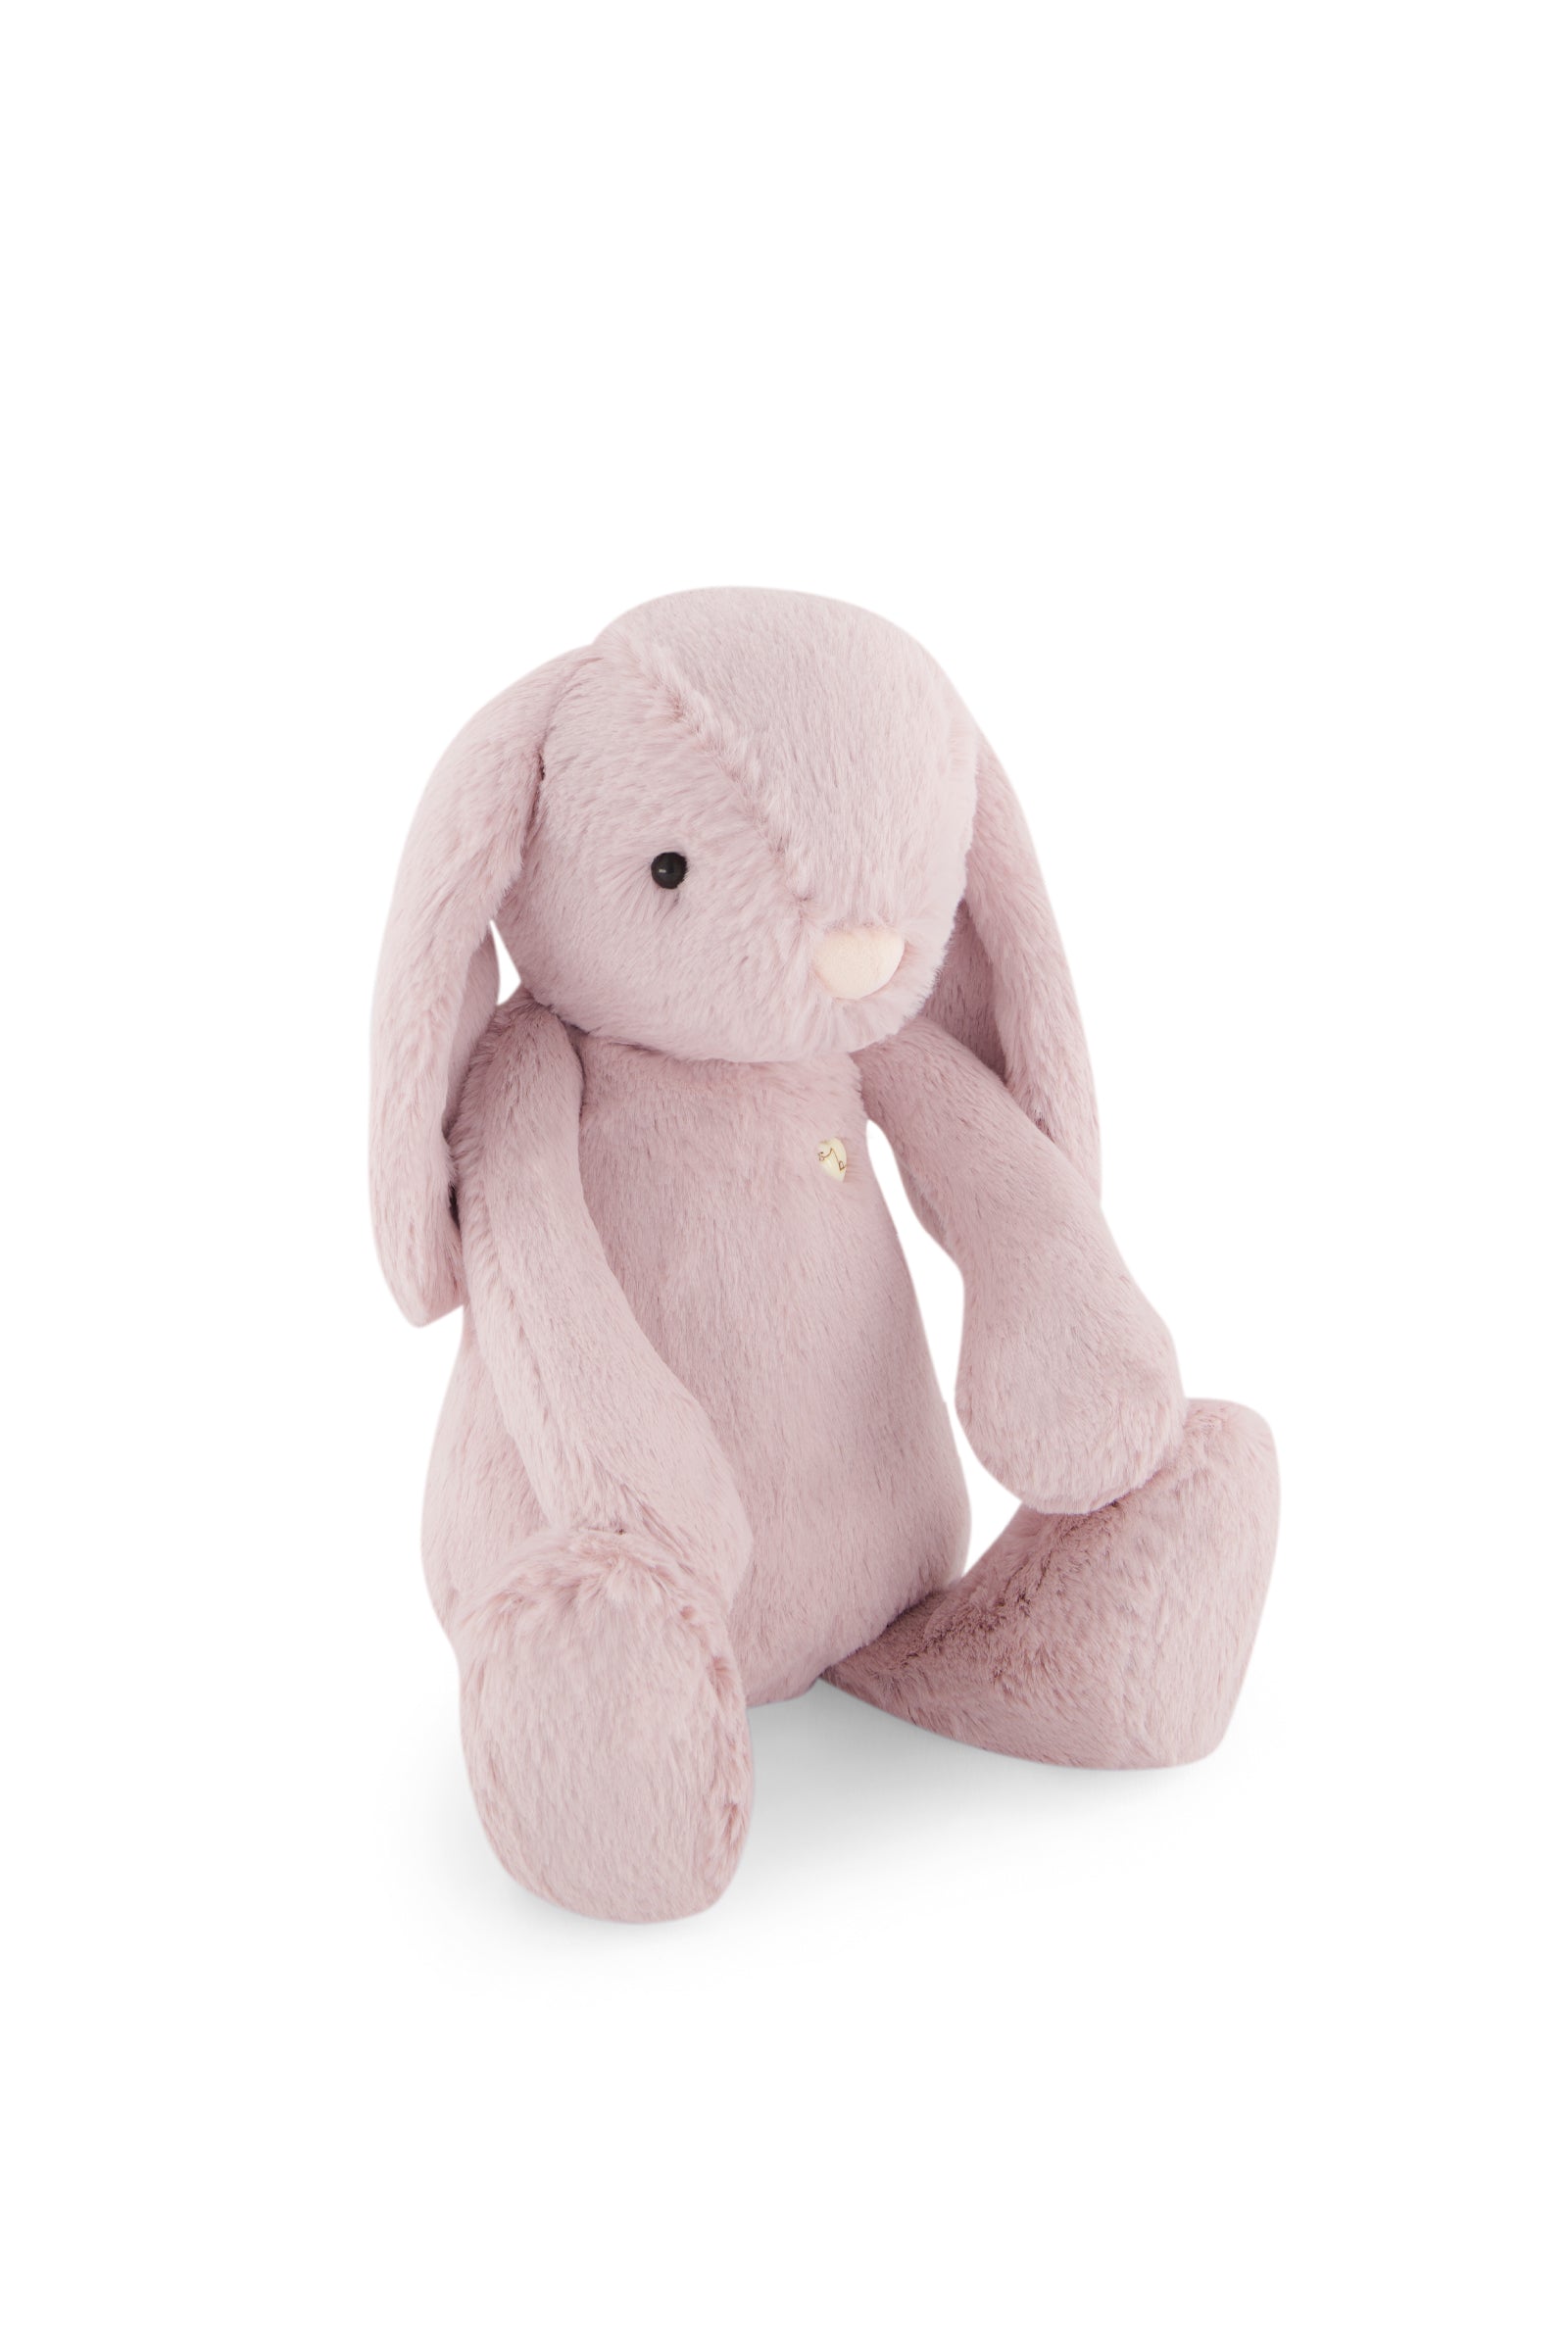 Snuggle Bunnies | Penelope the Bunny | Blossom